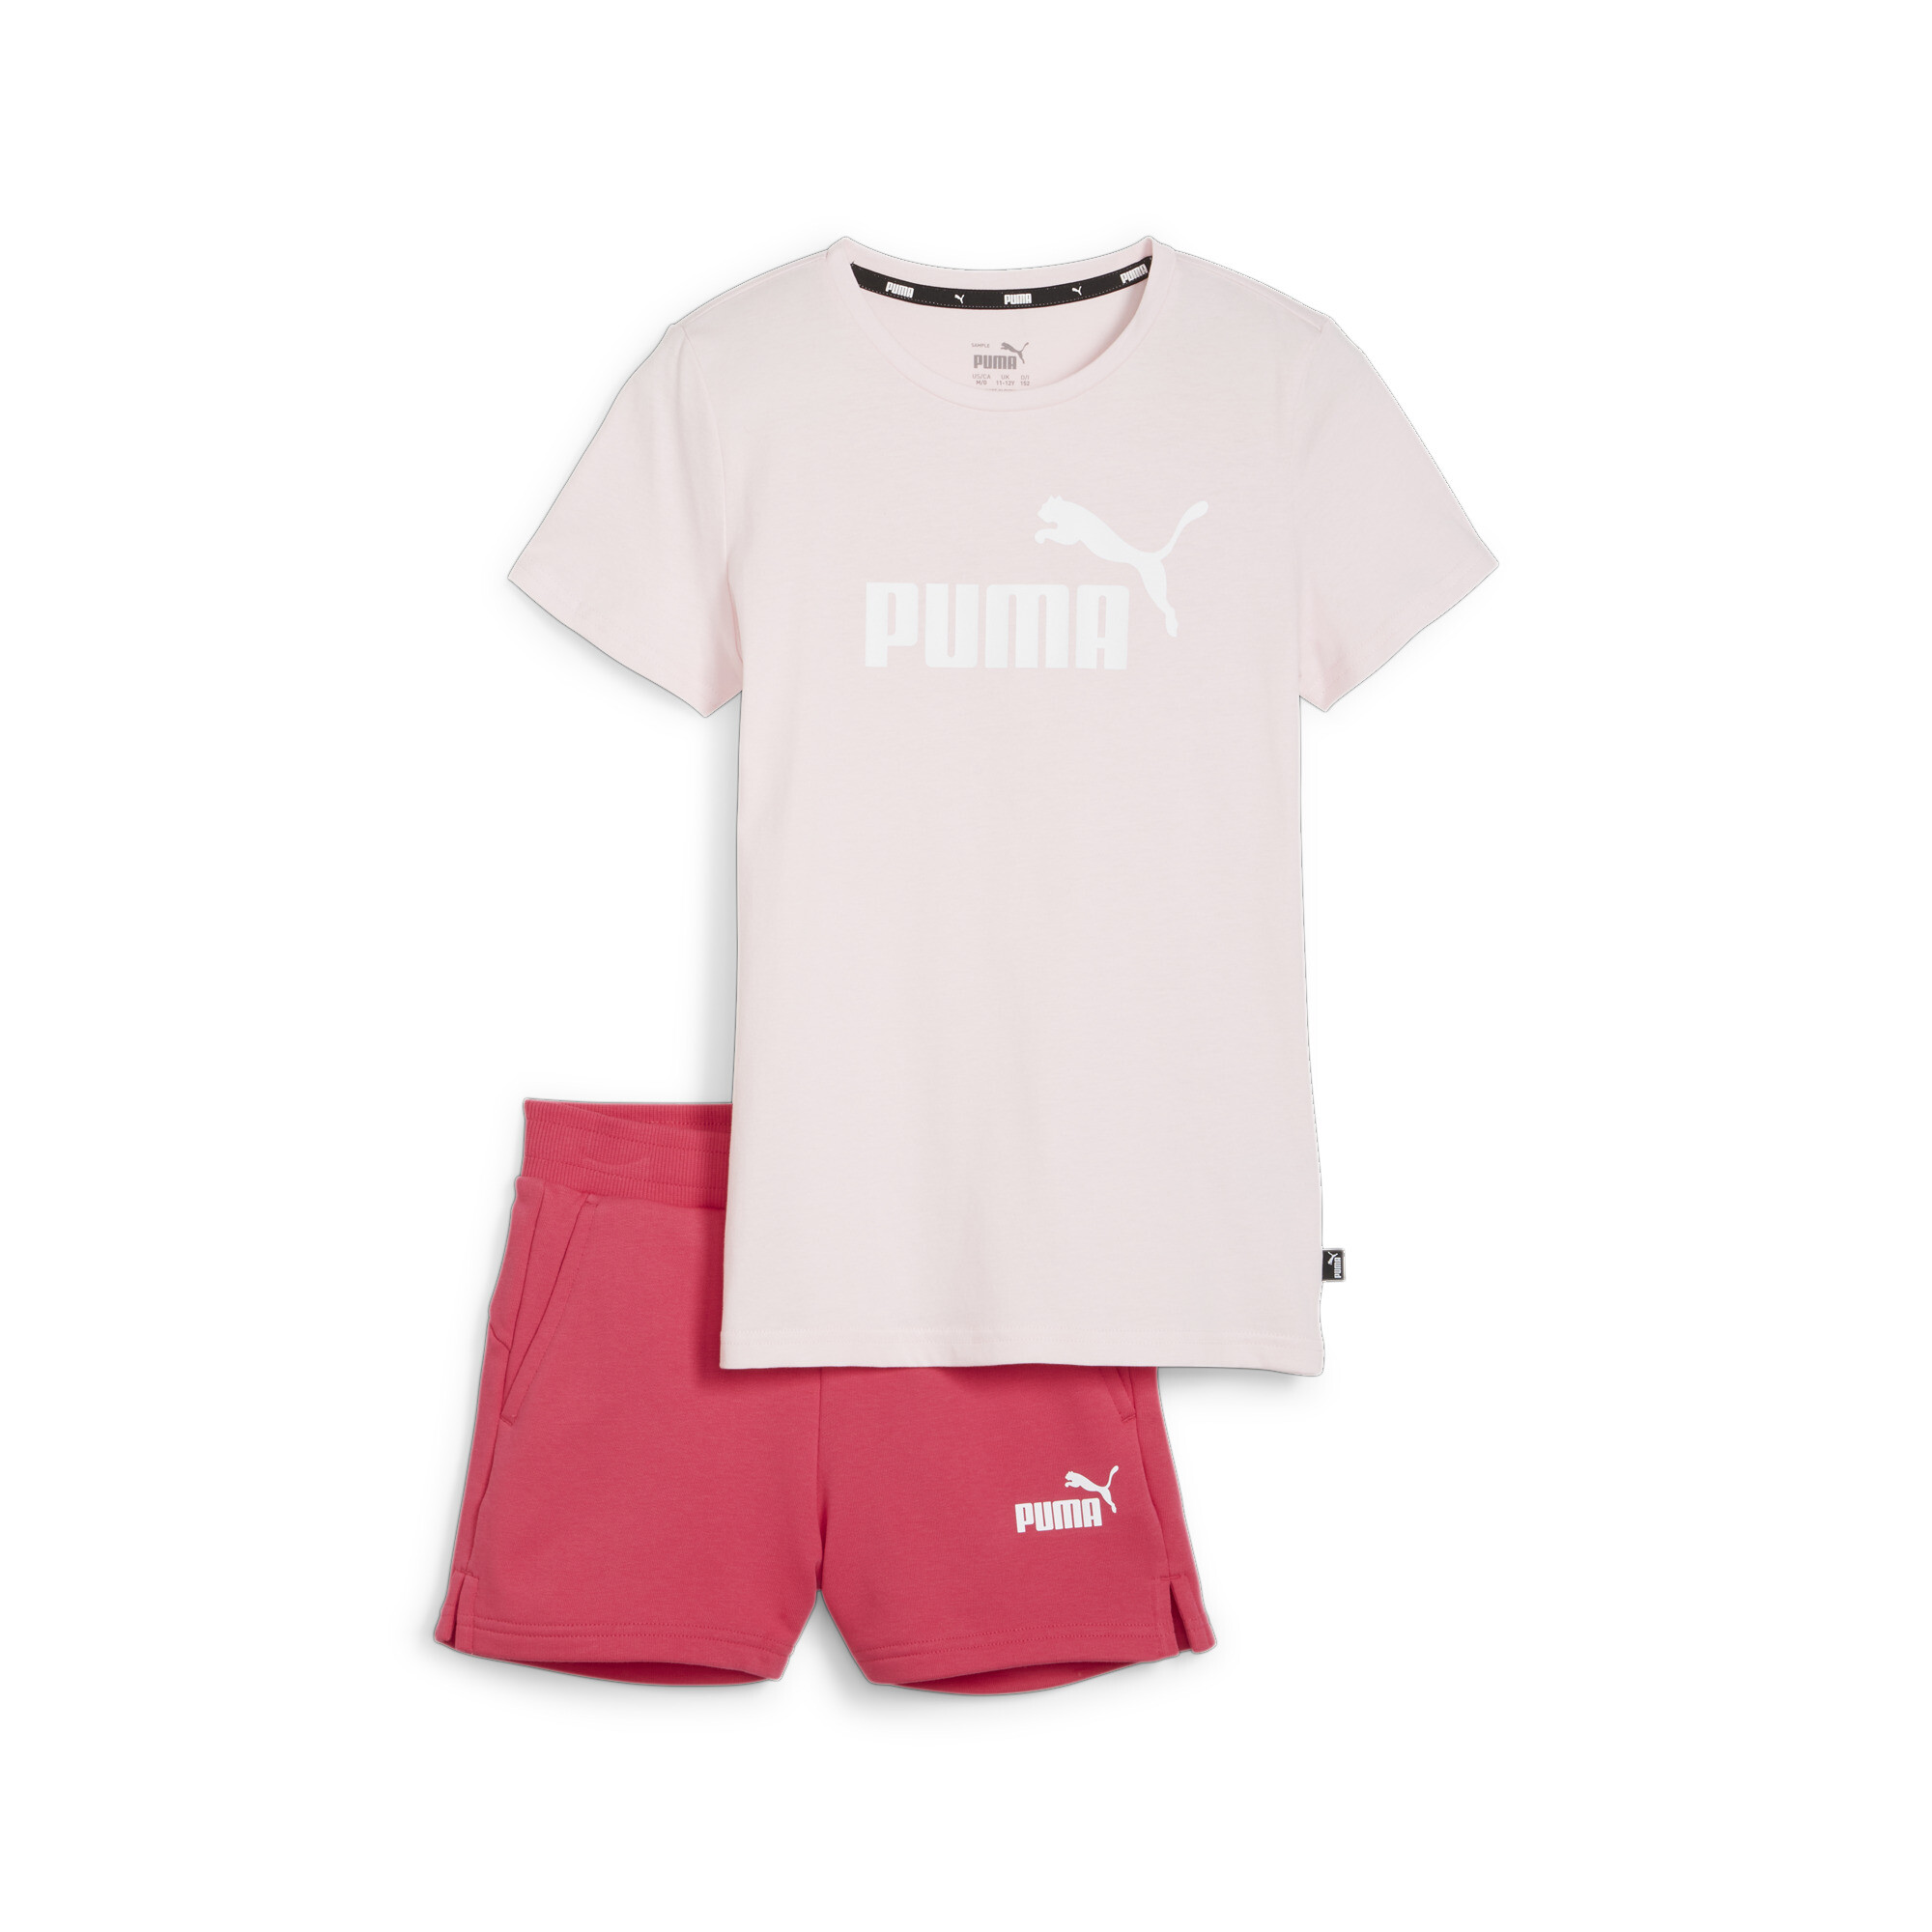 Women's Puma Logo Tee And Shorts Youth Set, Pink, Size 13-14Y, Clothing